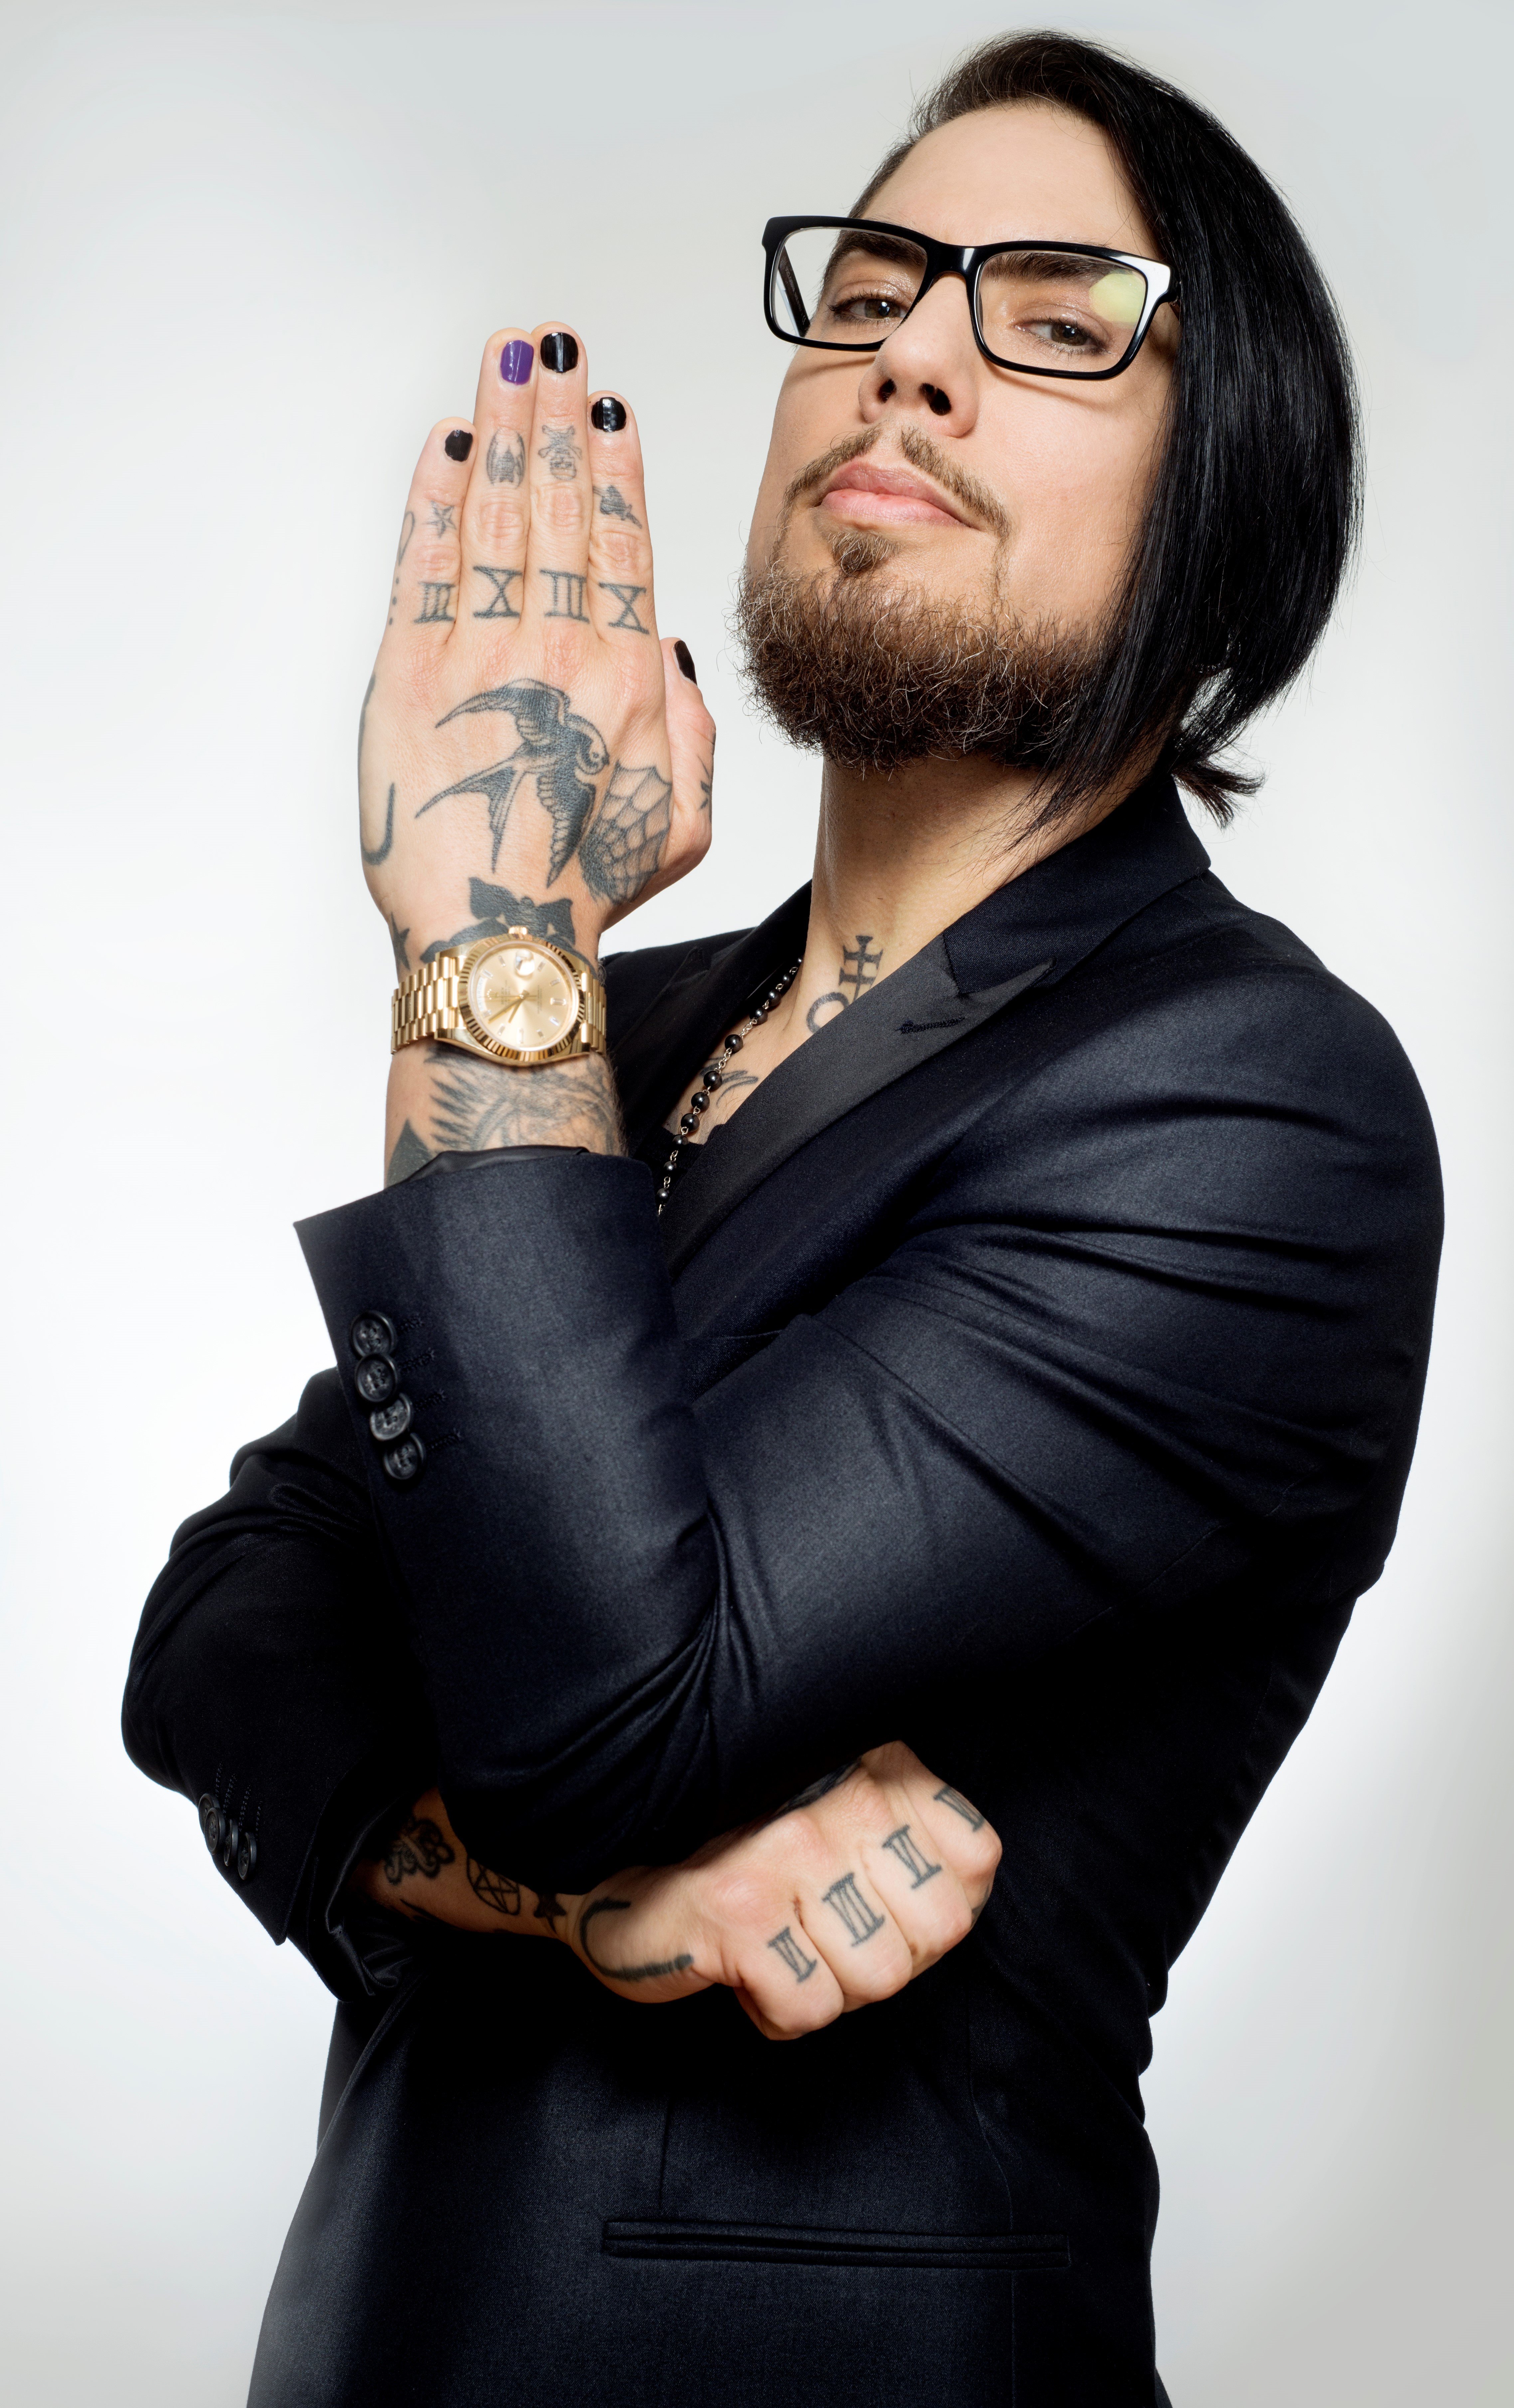 Ink Master' star gives free tattoos to party guests | Page Six